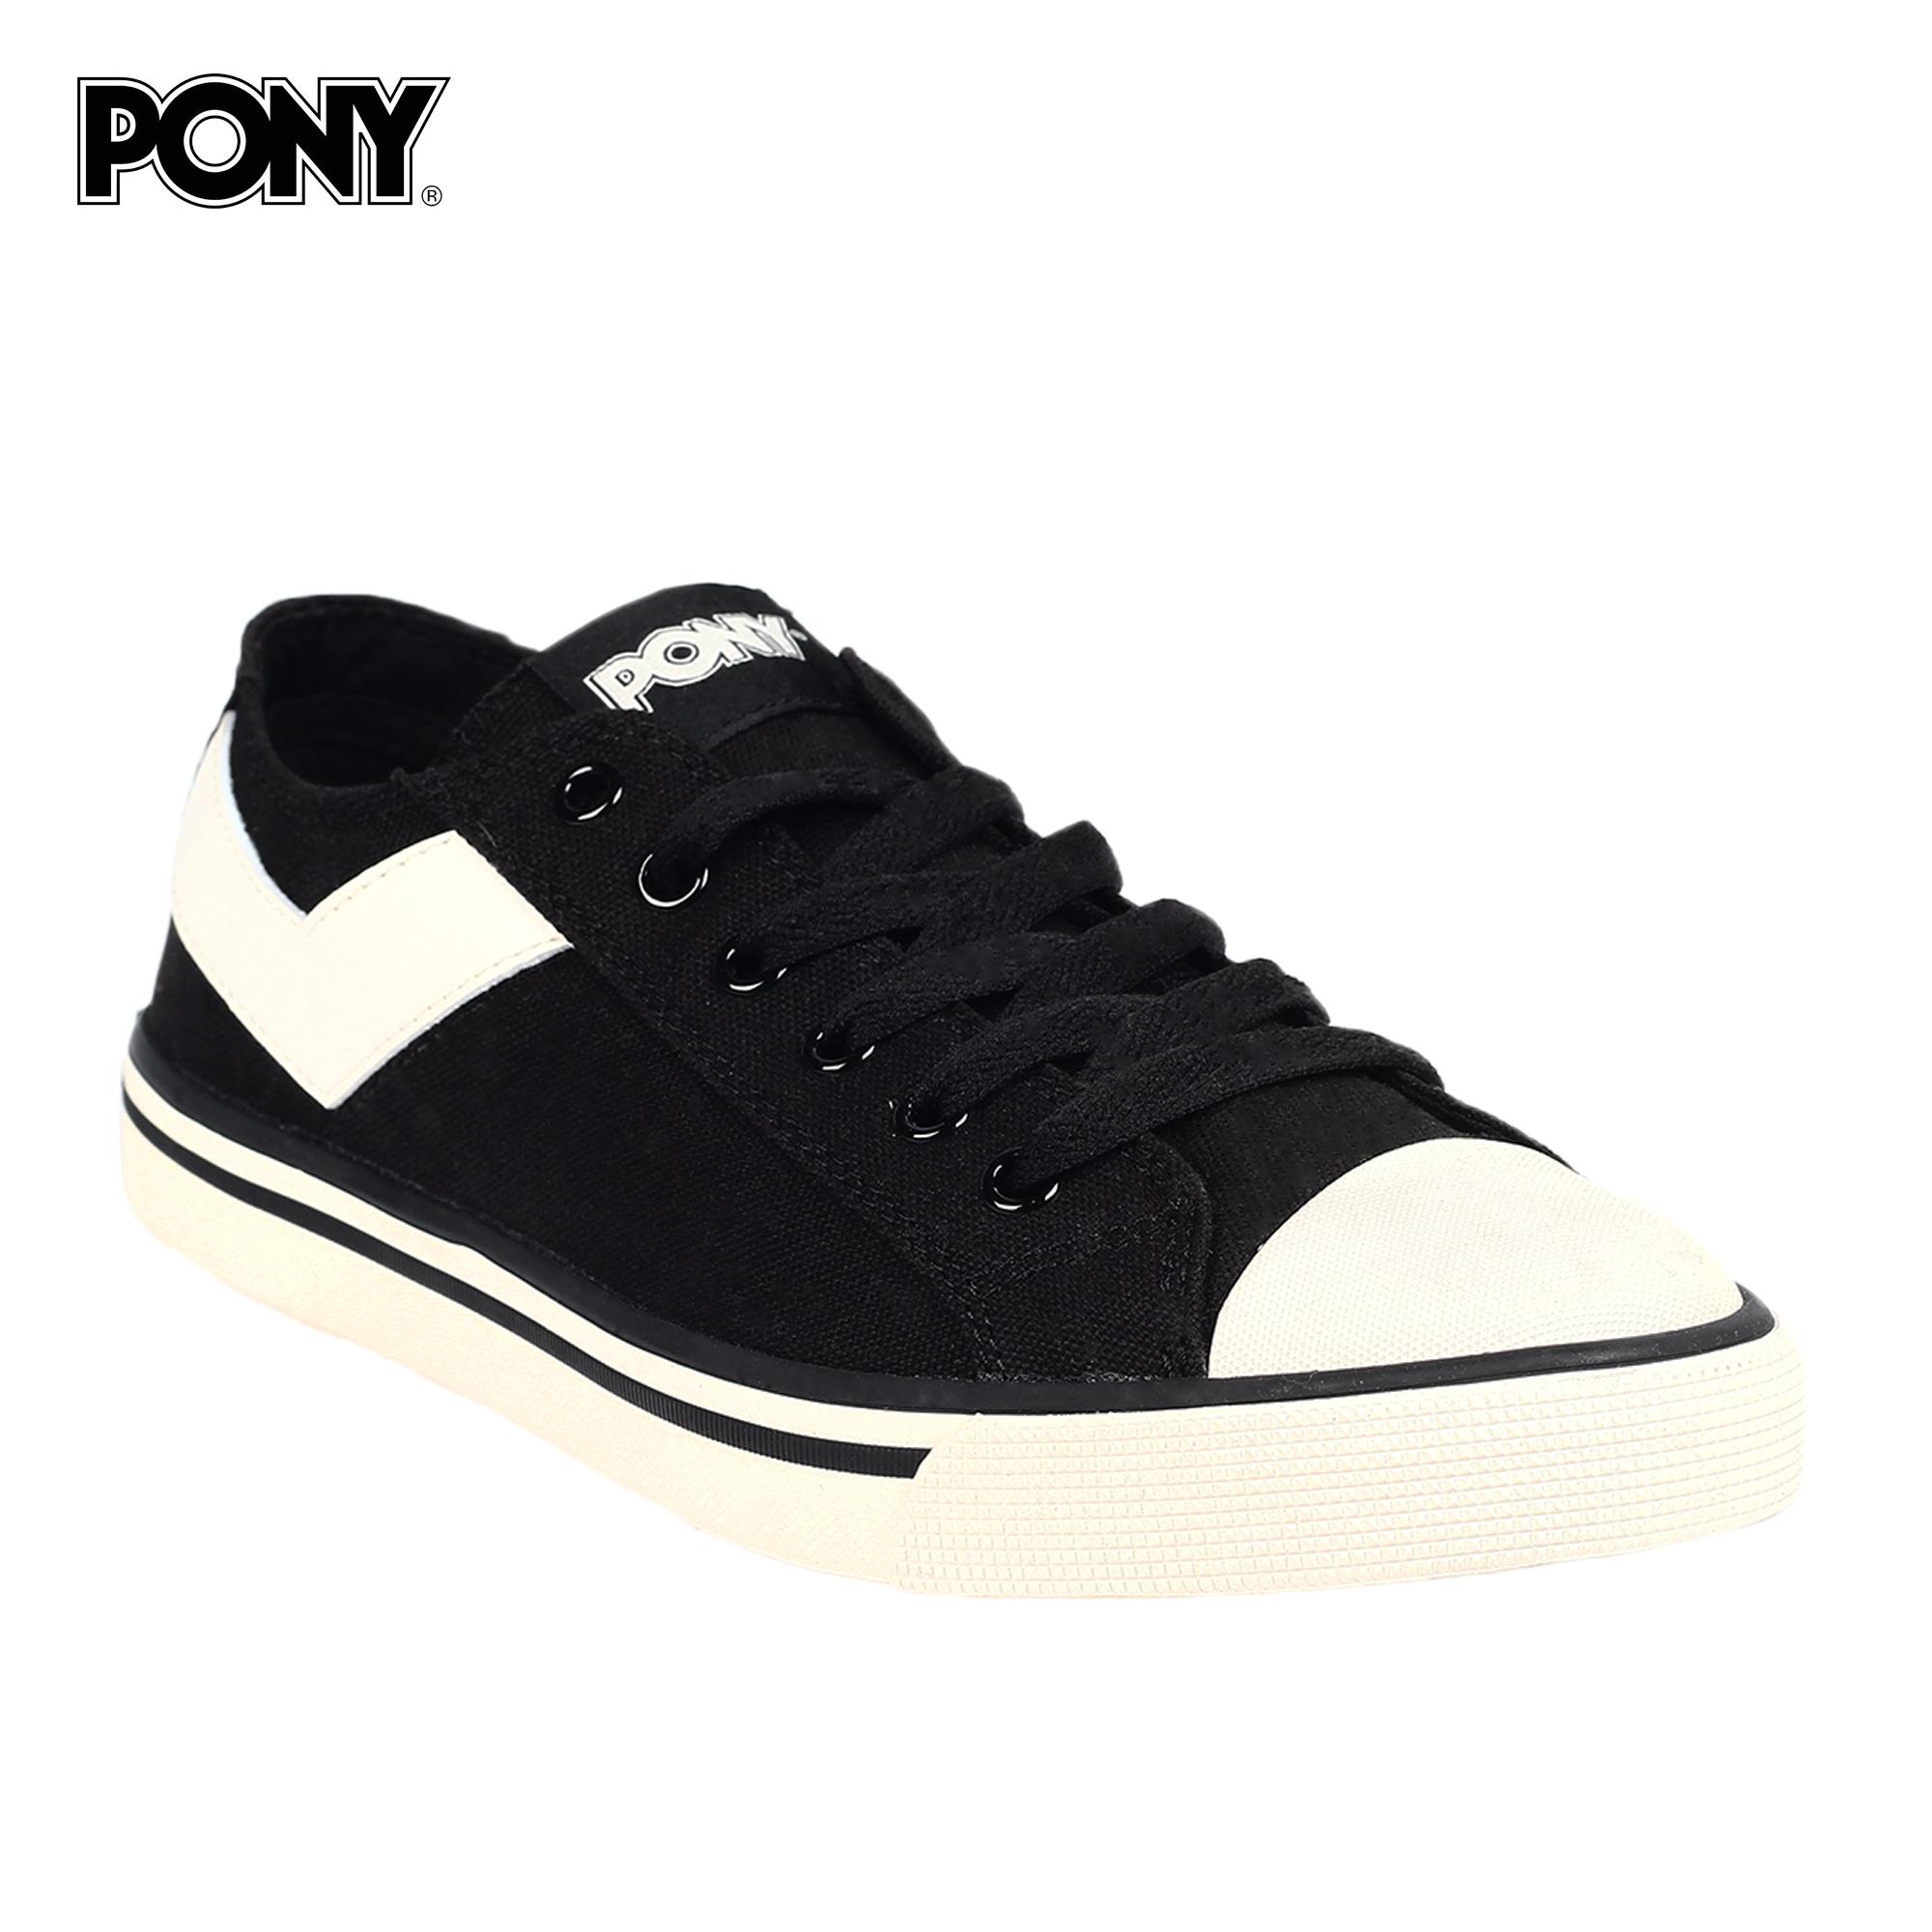 pony shoes for sale